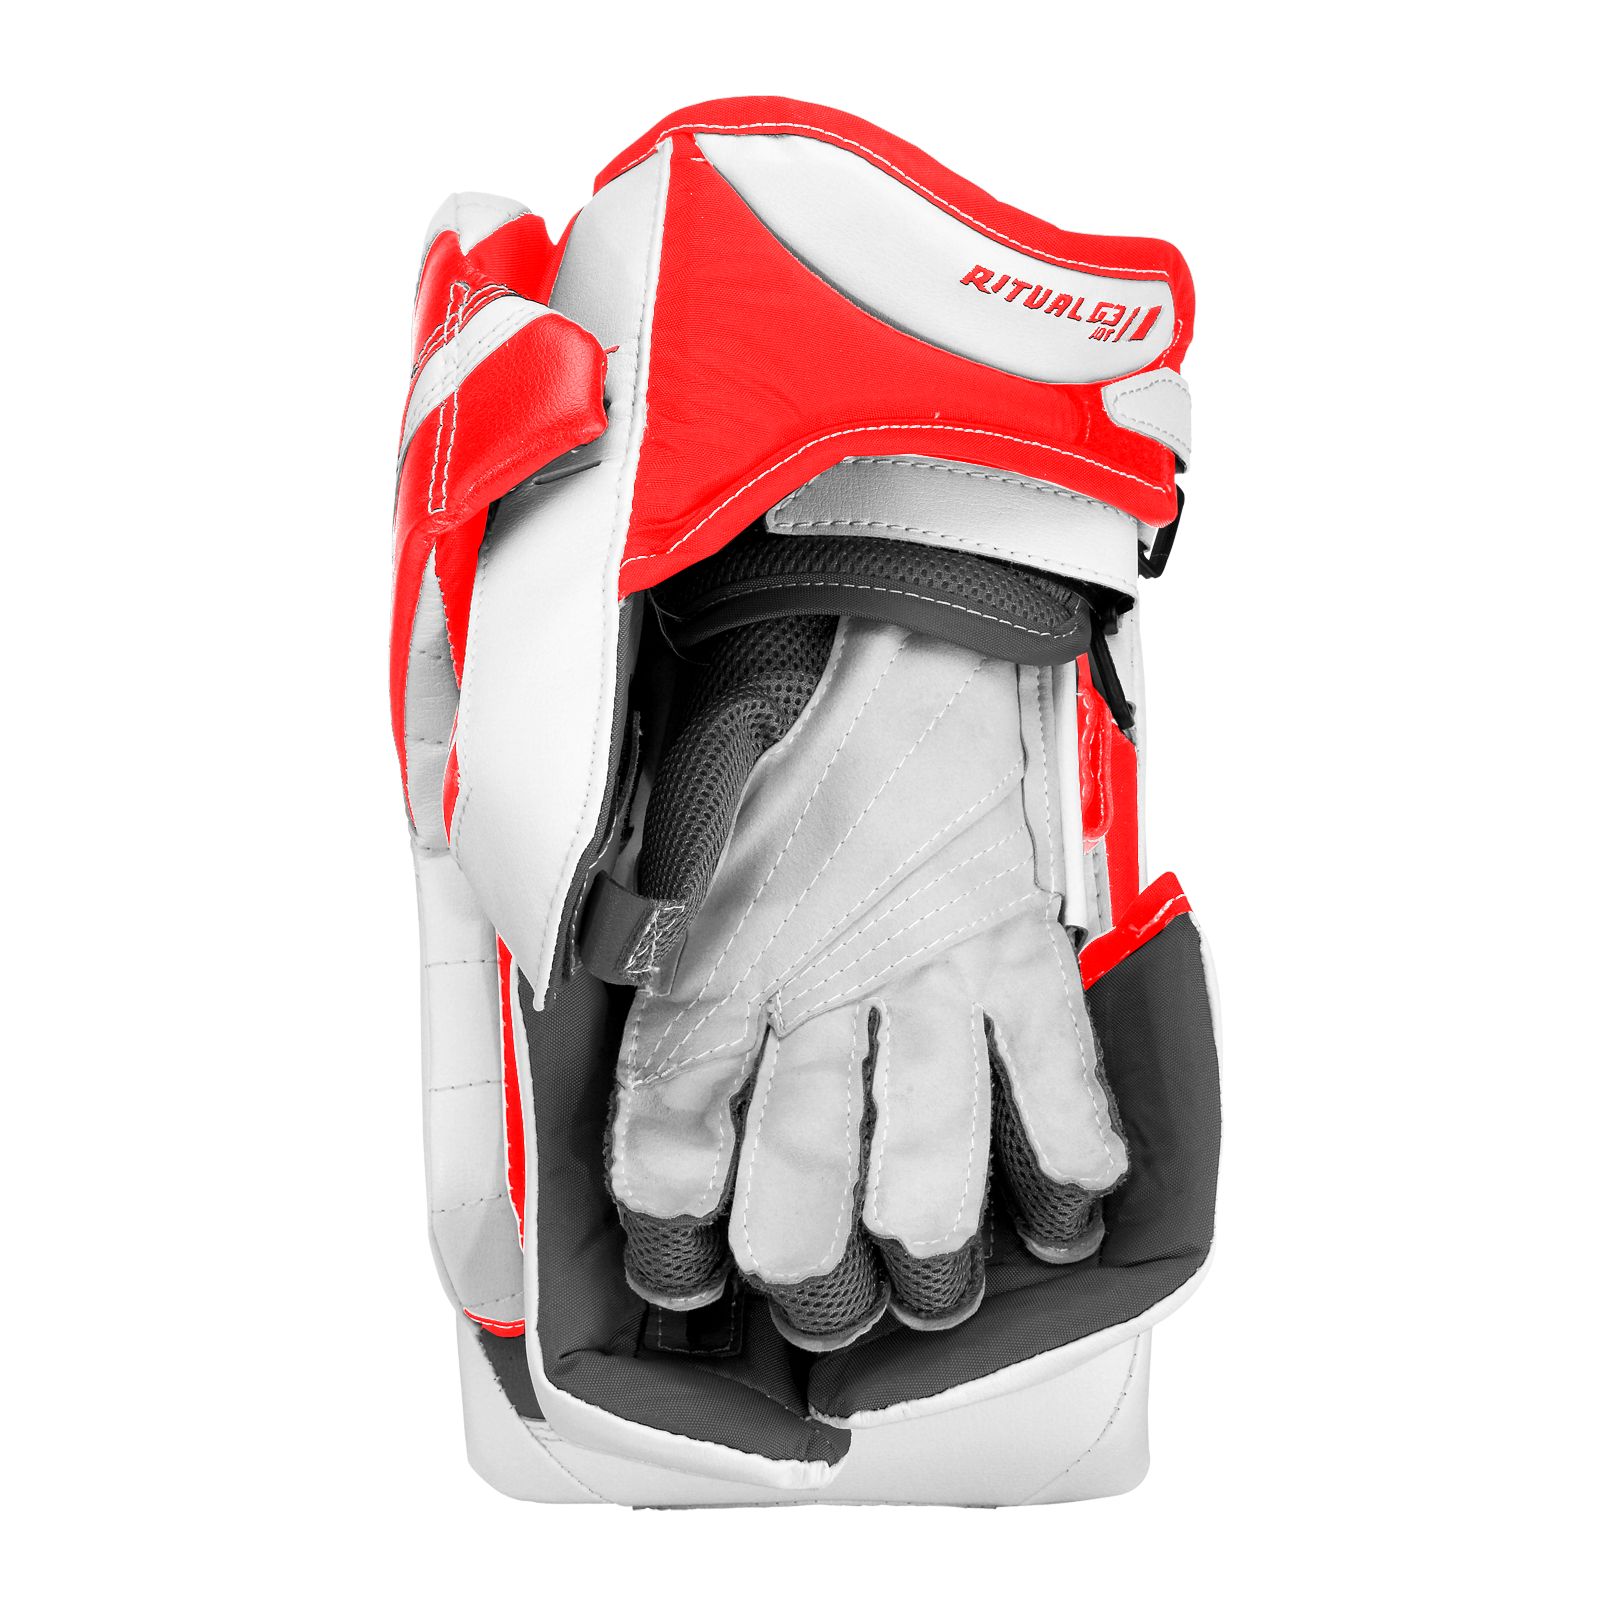 Ritual G3 Int. Blocker, White with Red image number 1